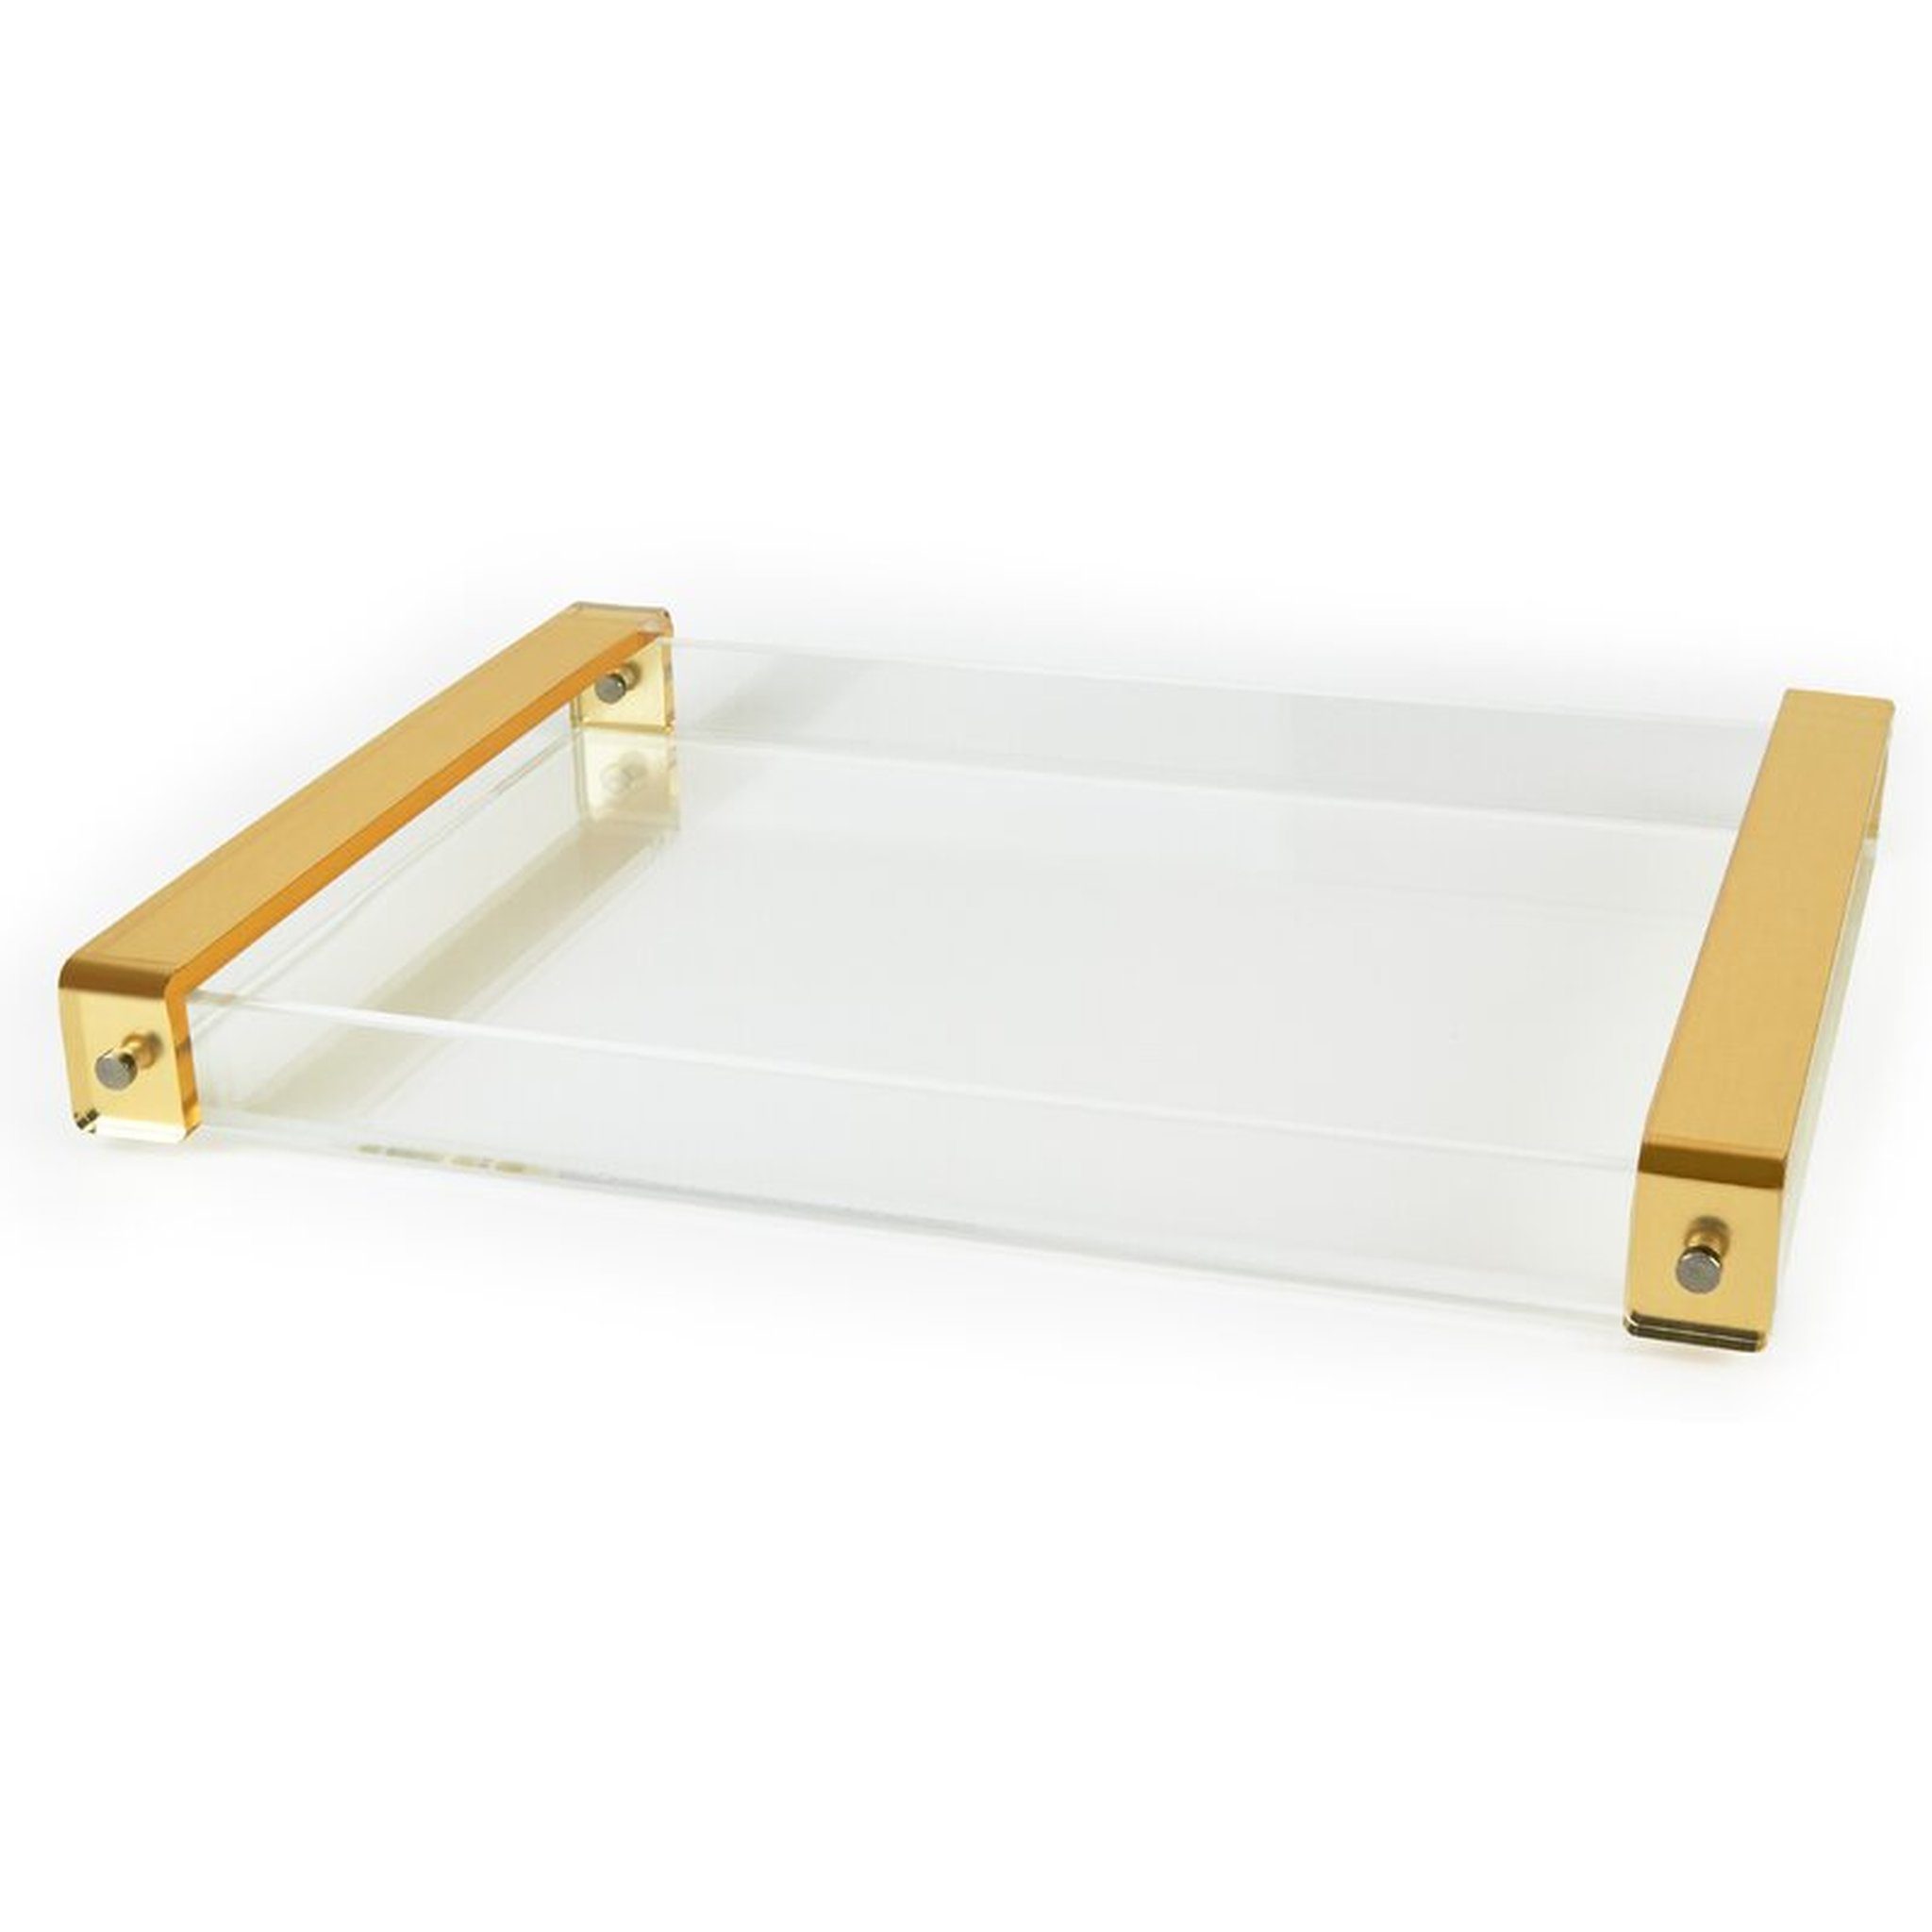 Modern Clear Acrylic Serving Tray Rectangle Decorative Tray with handles